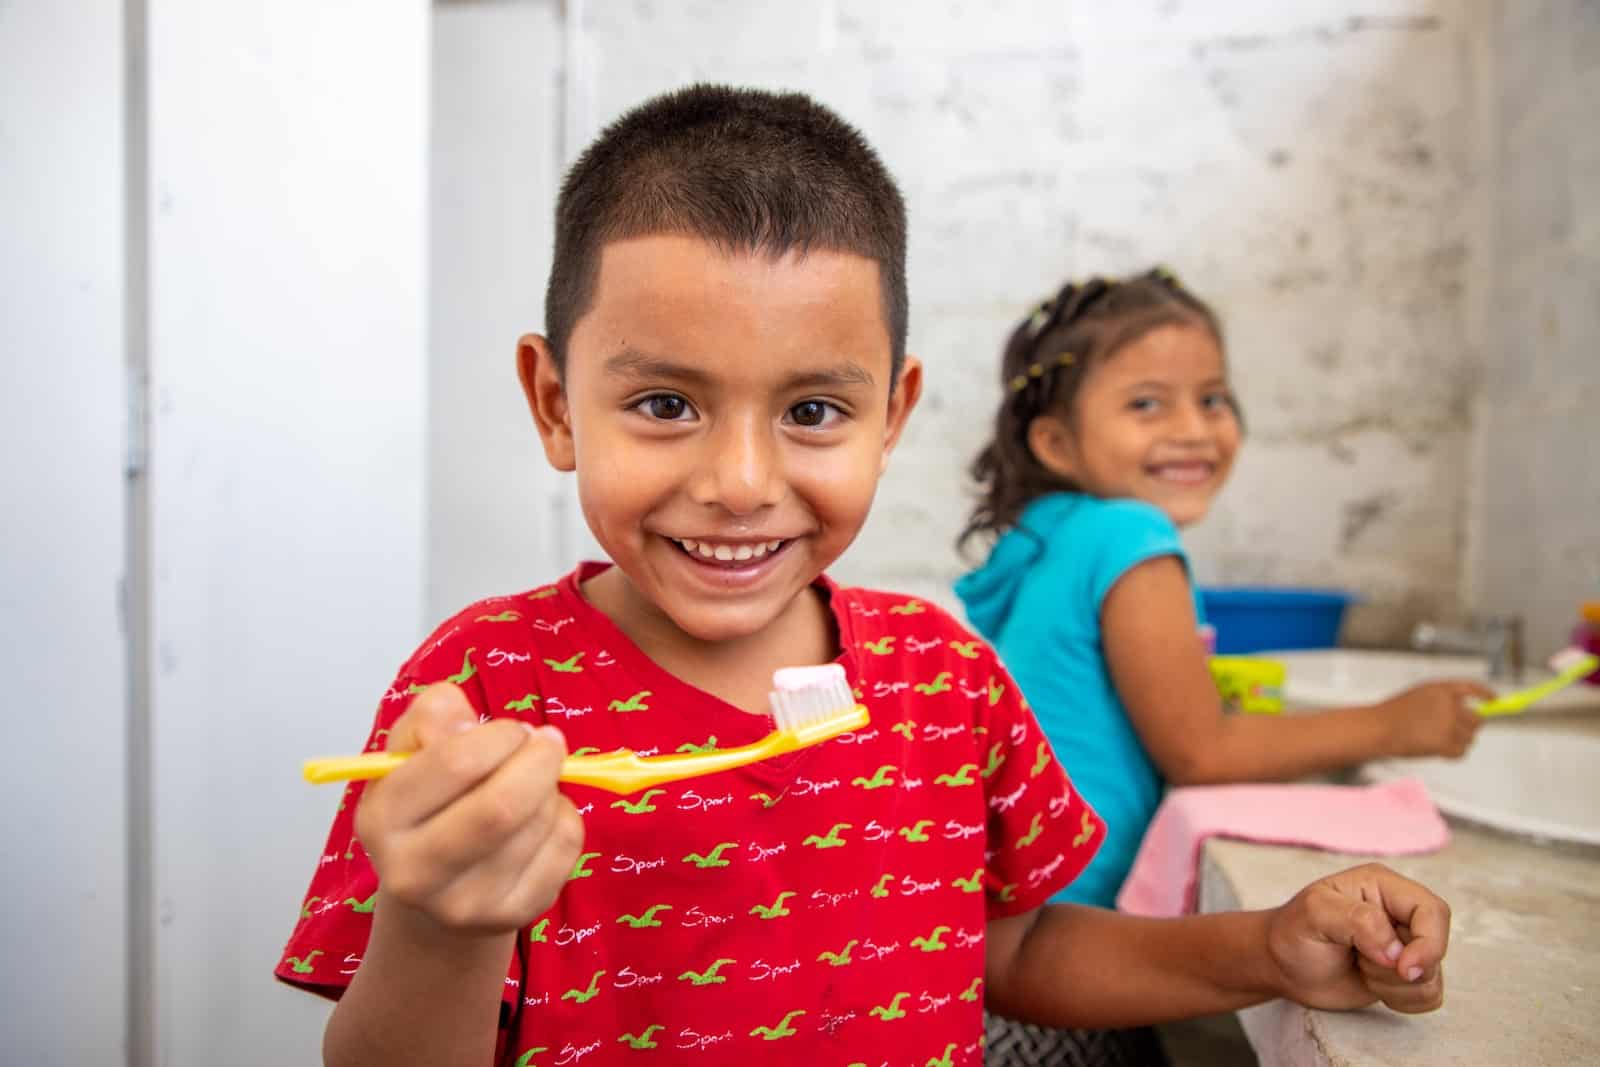 A boy in a red shirt holds up a toothbrush and smiles.